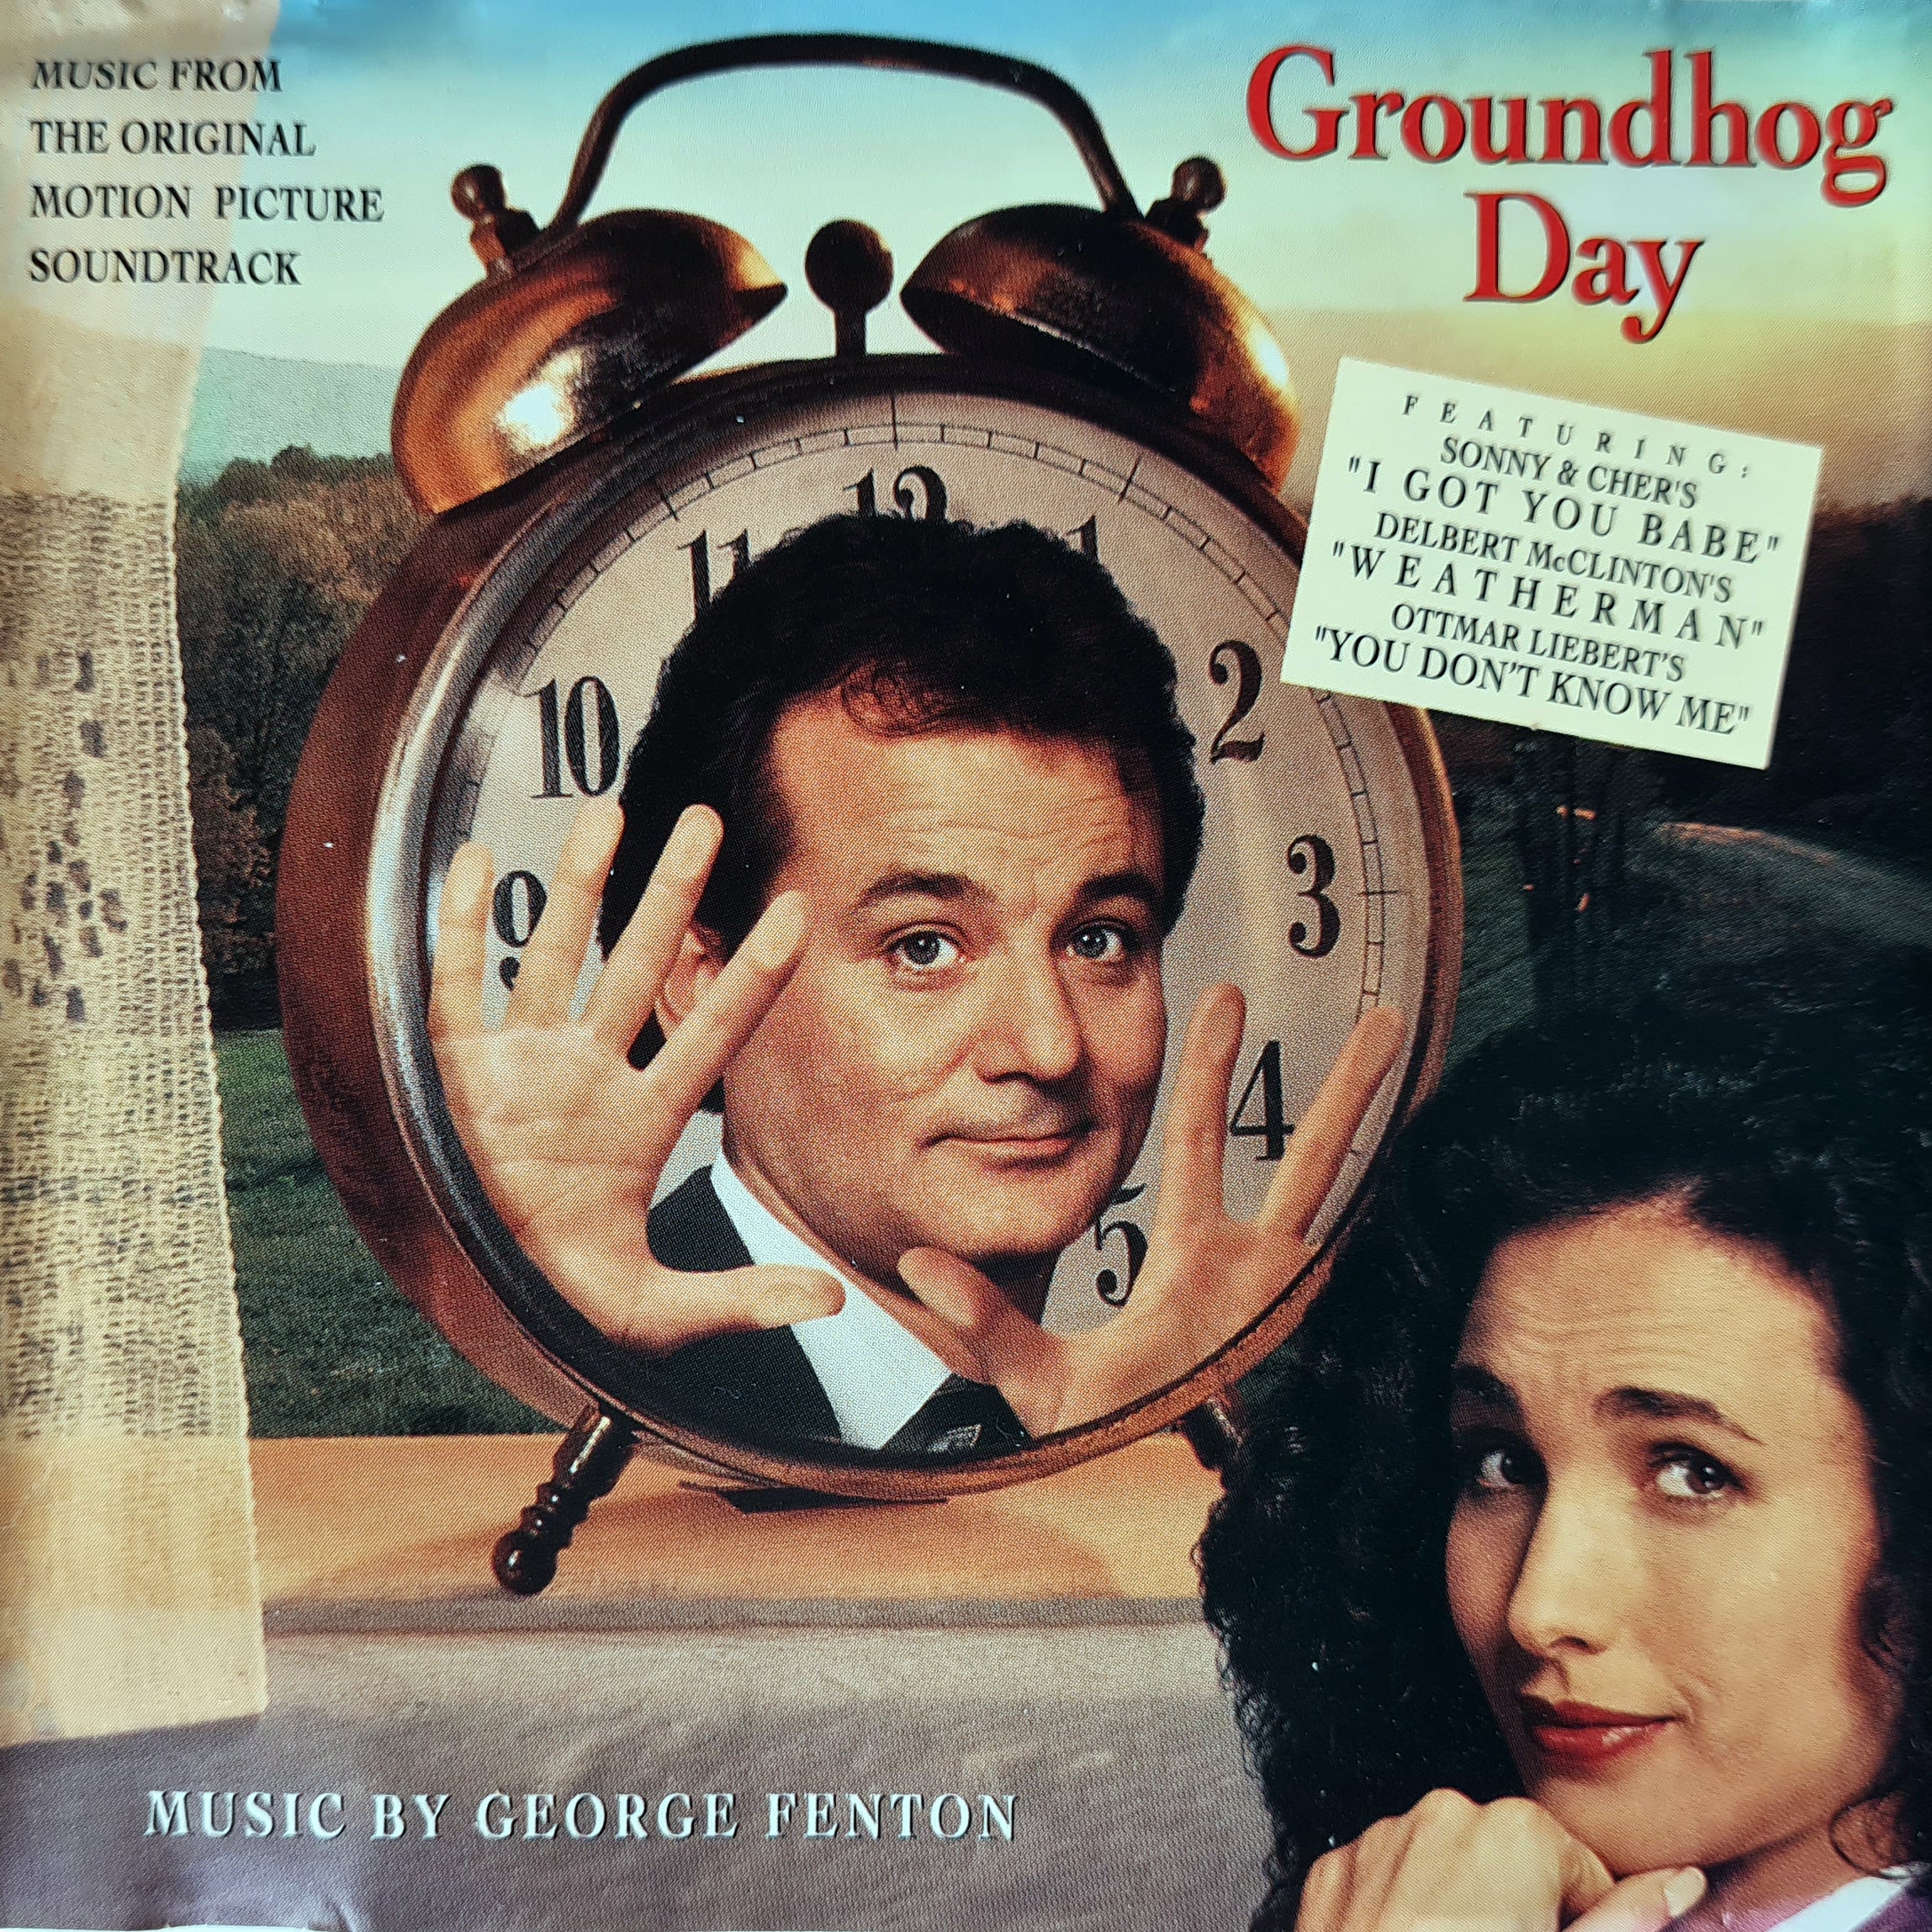 Groundhog Day - Music from the Original Motion Picture Soundtrack (CD)